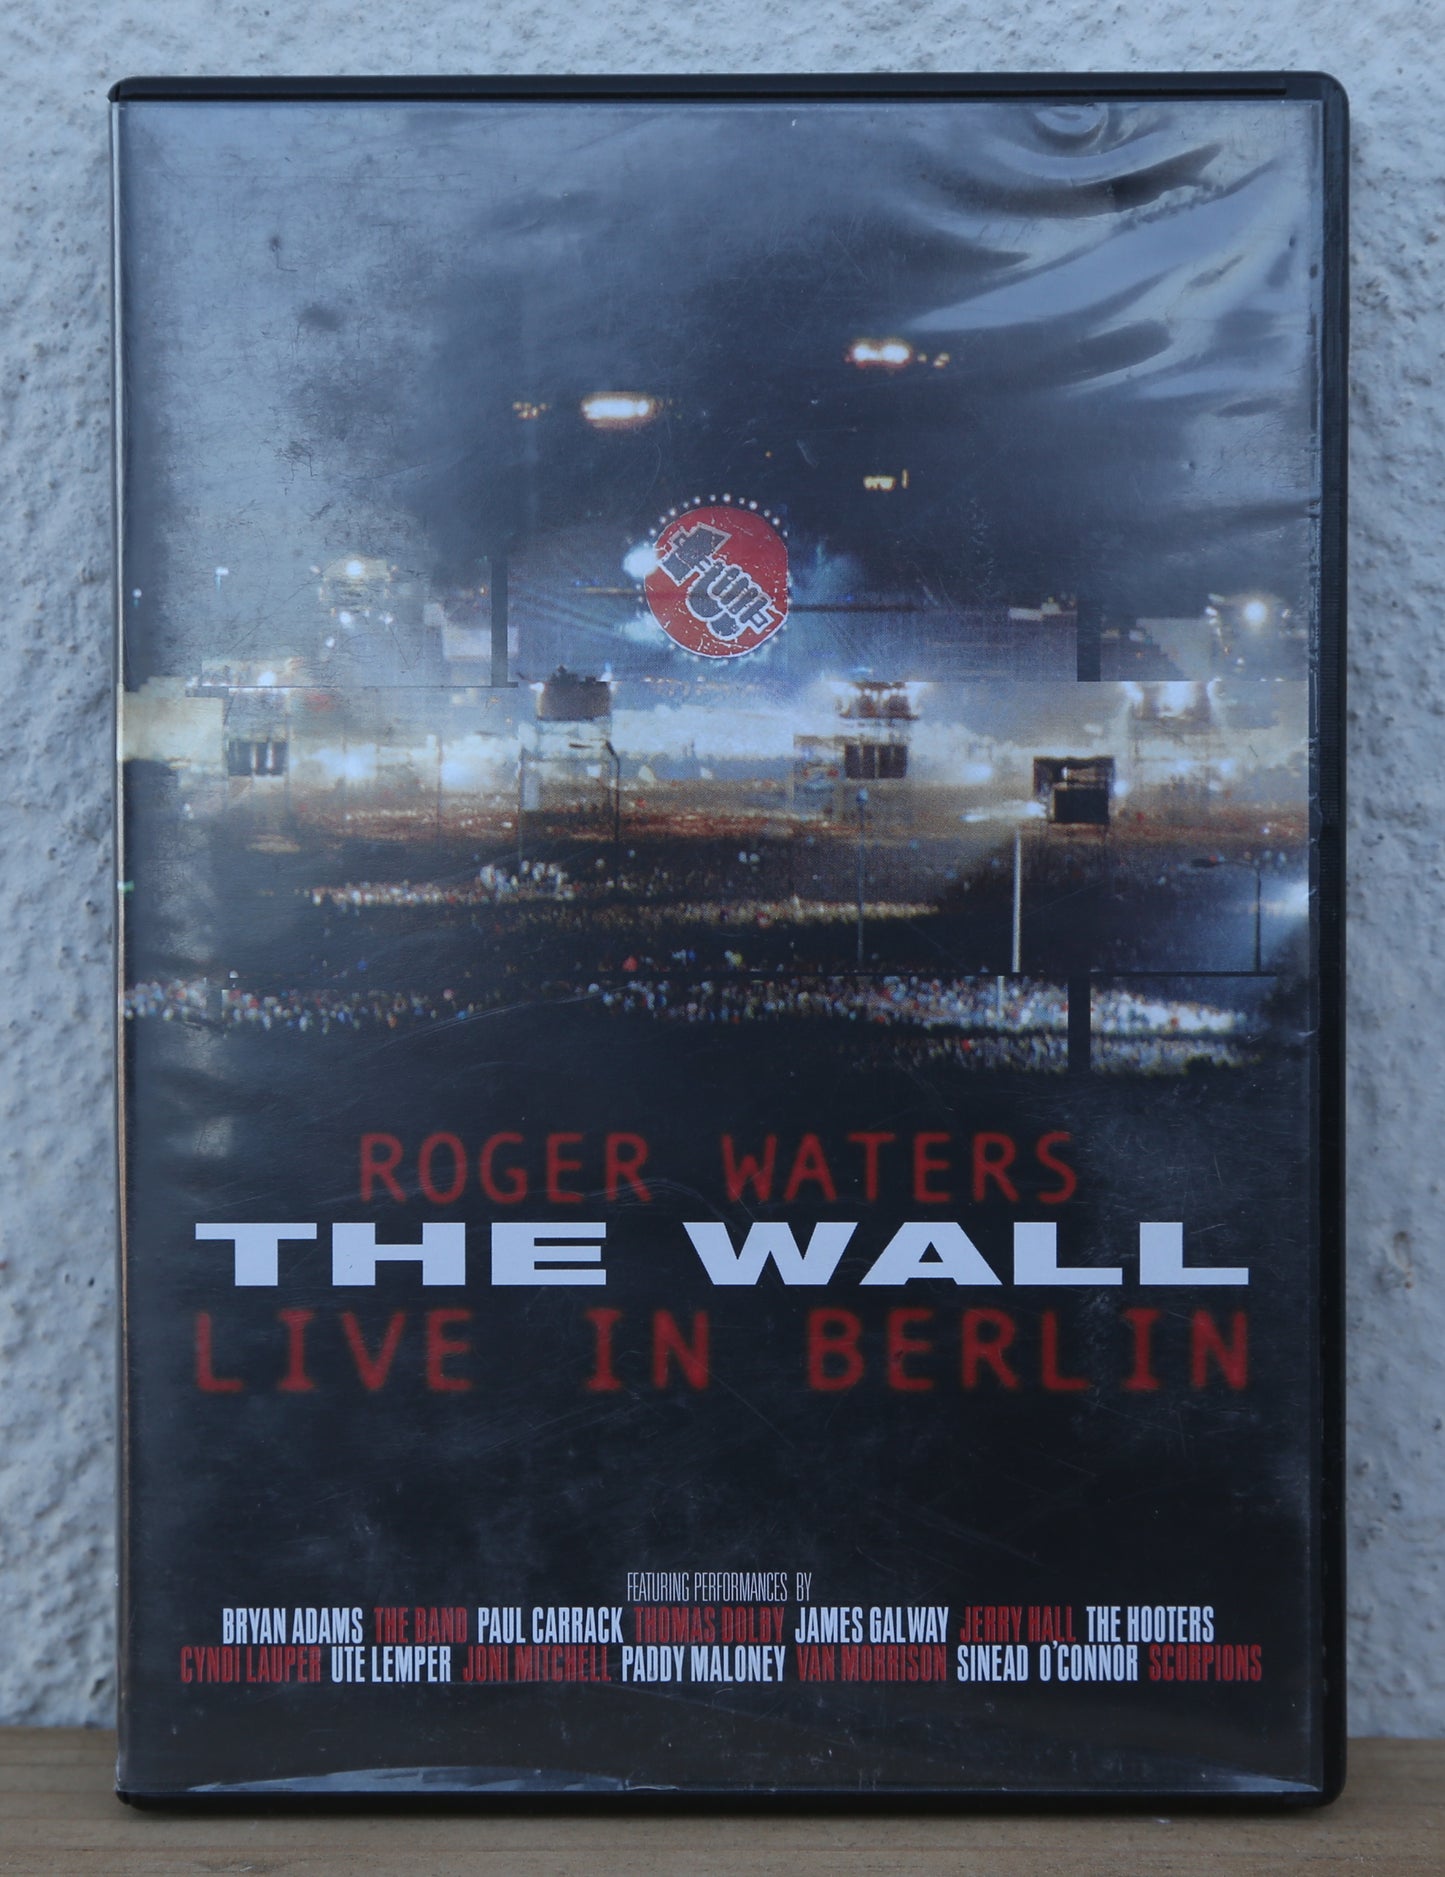 Roger Waters - The Wall, live in Berlin